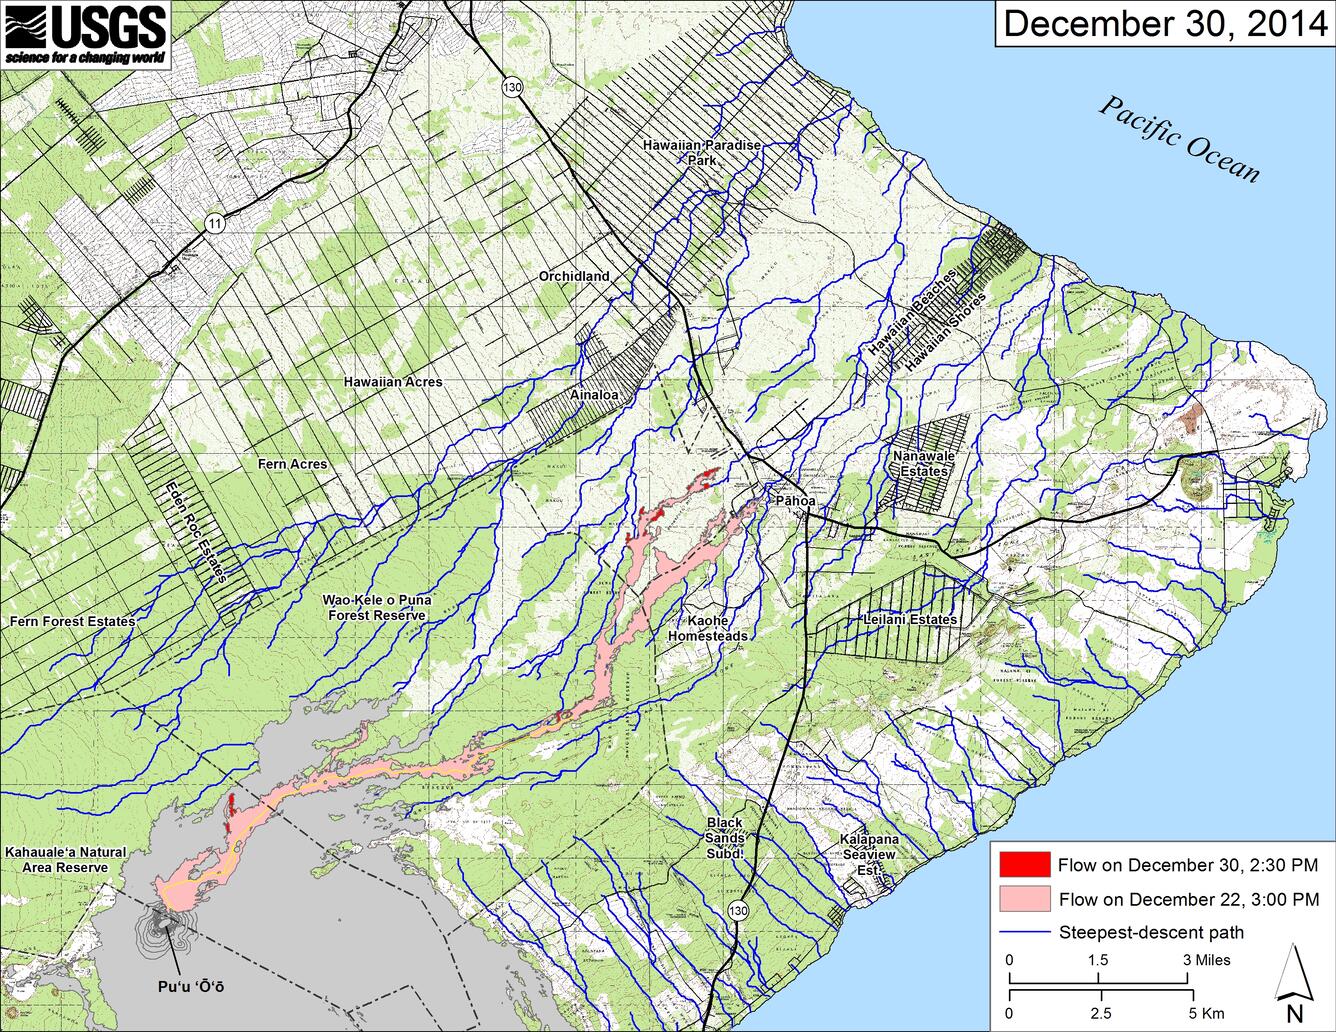 Small-scale map of Kīlauea's East Rift Zone lava flow...